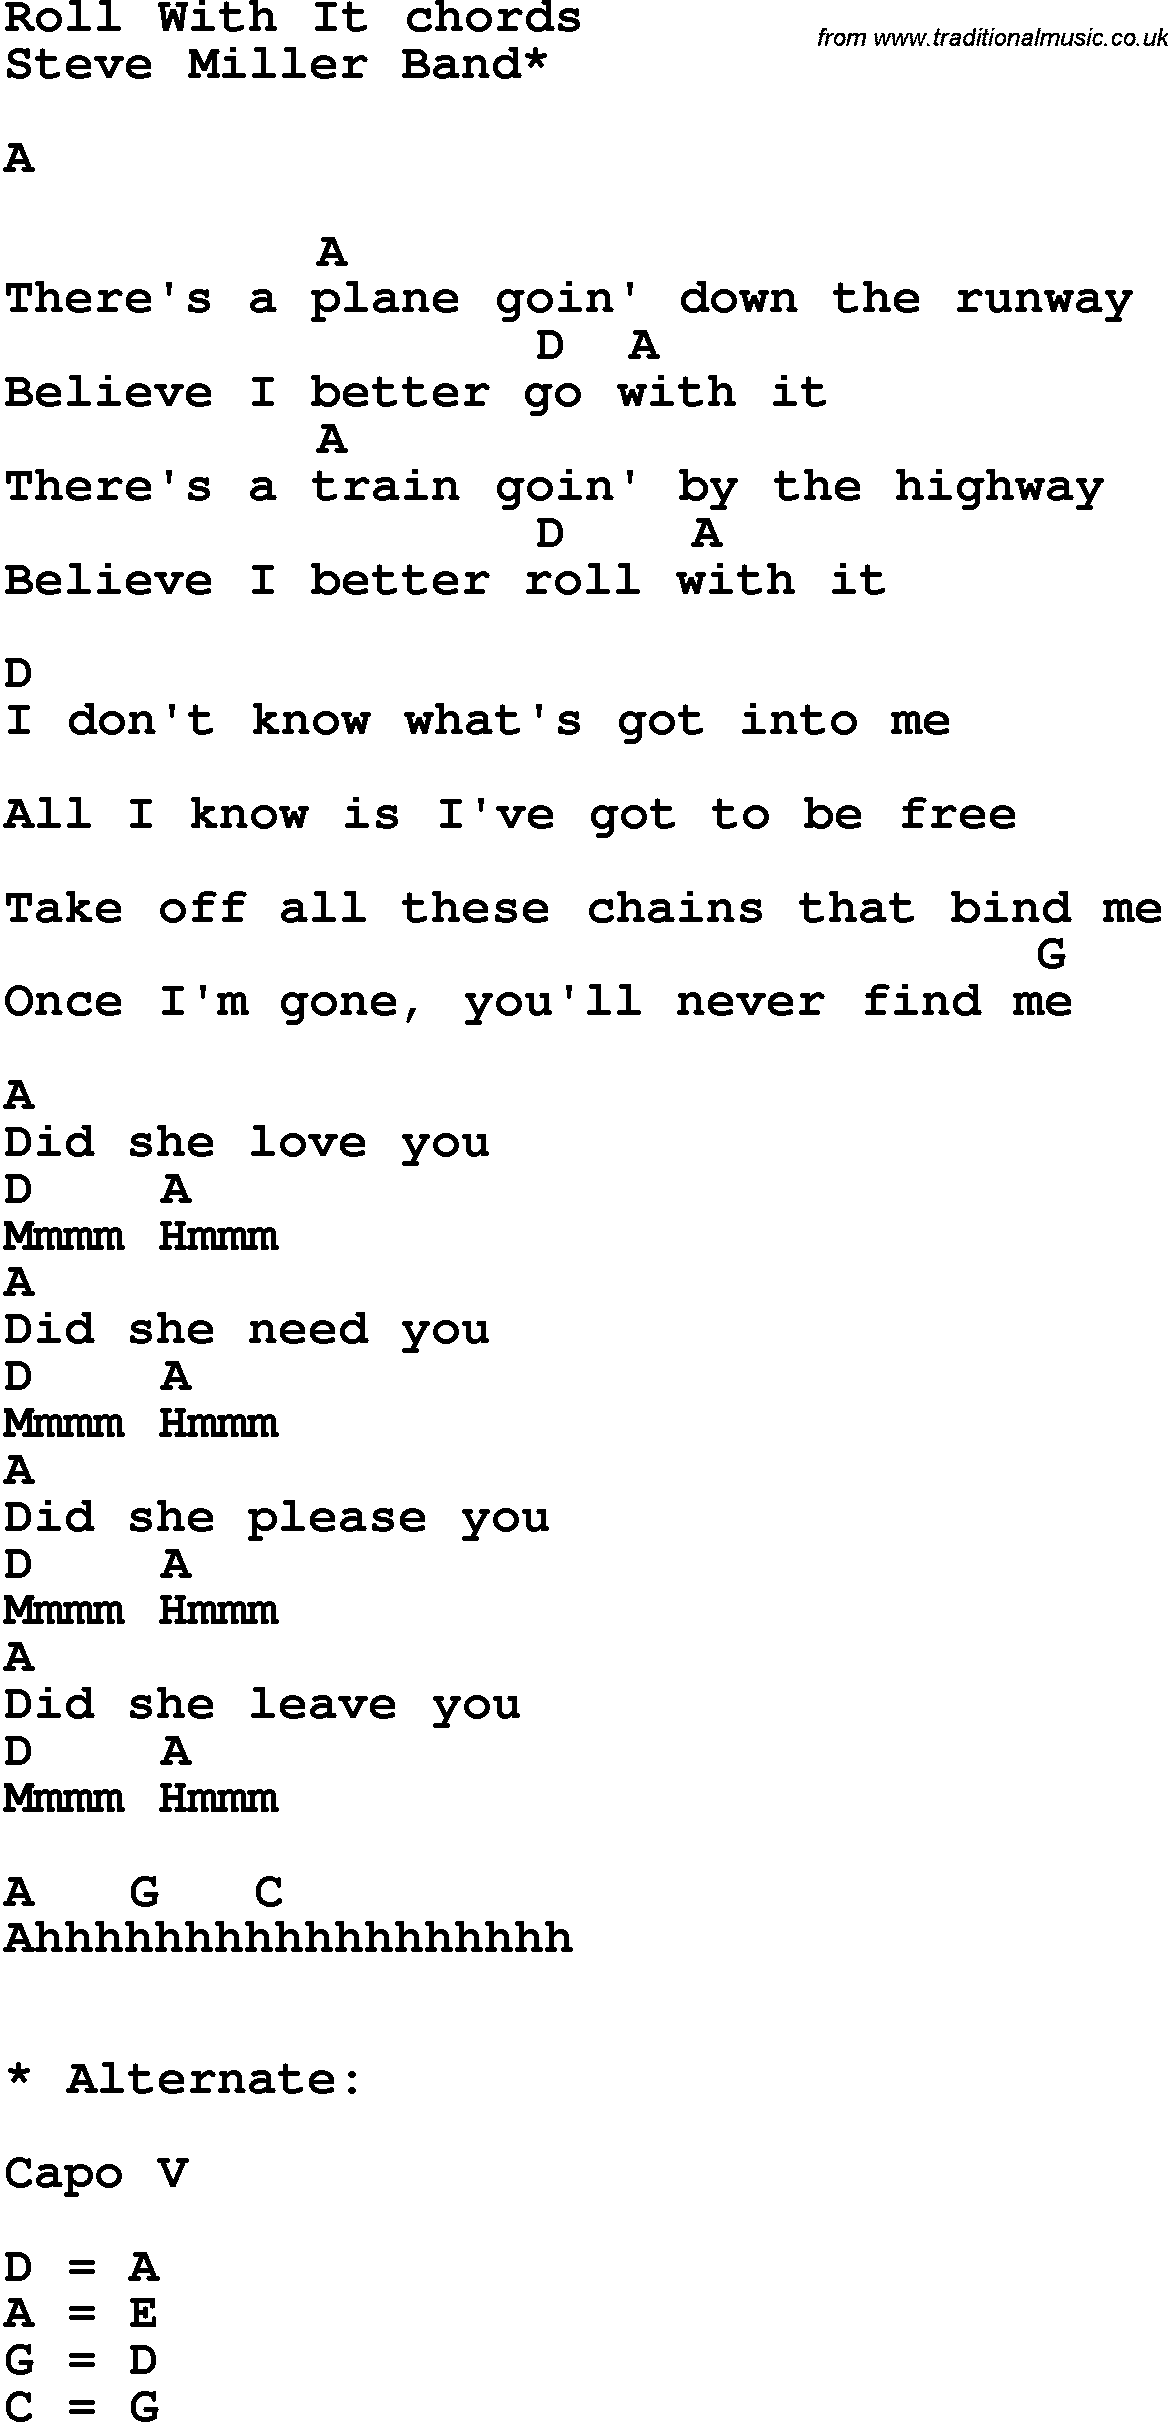 Song Lyrics with guitar chords for Roll With It